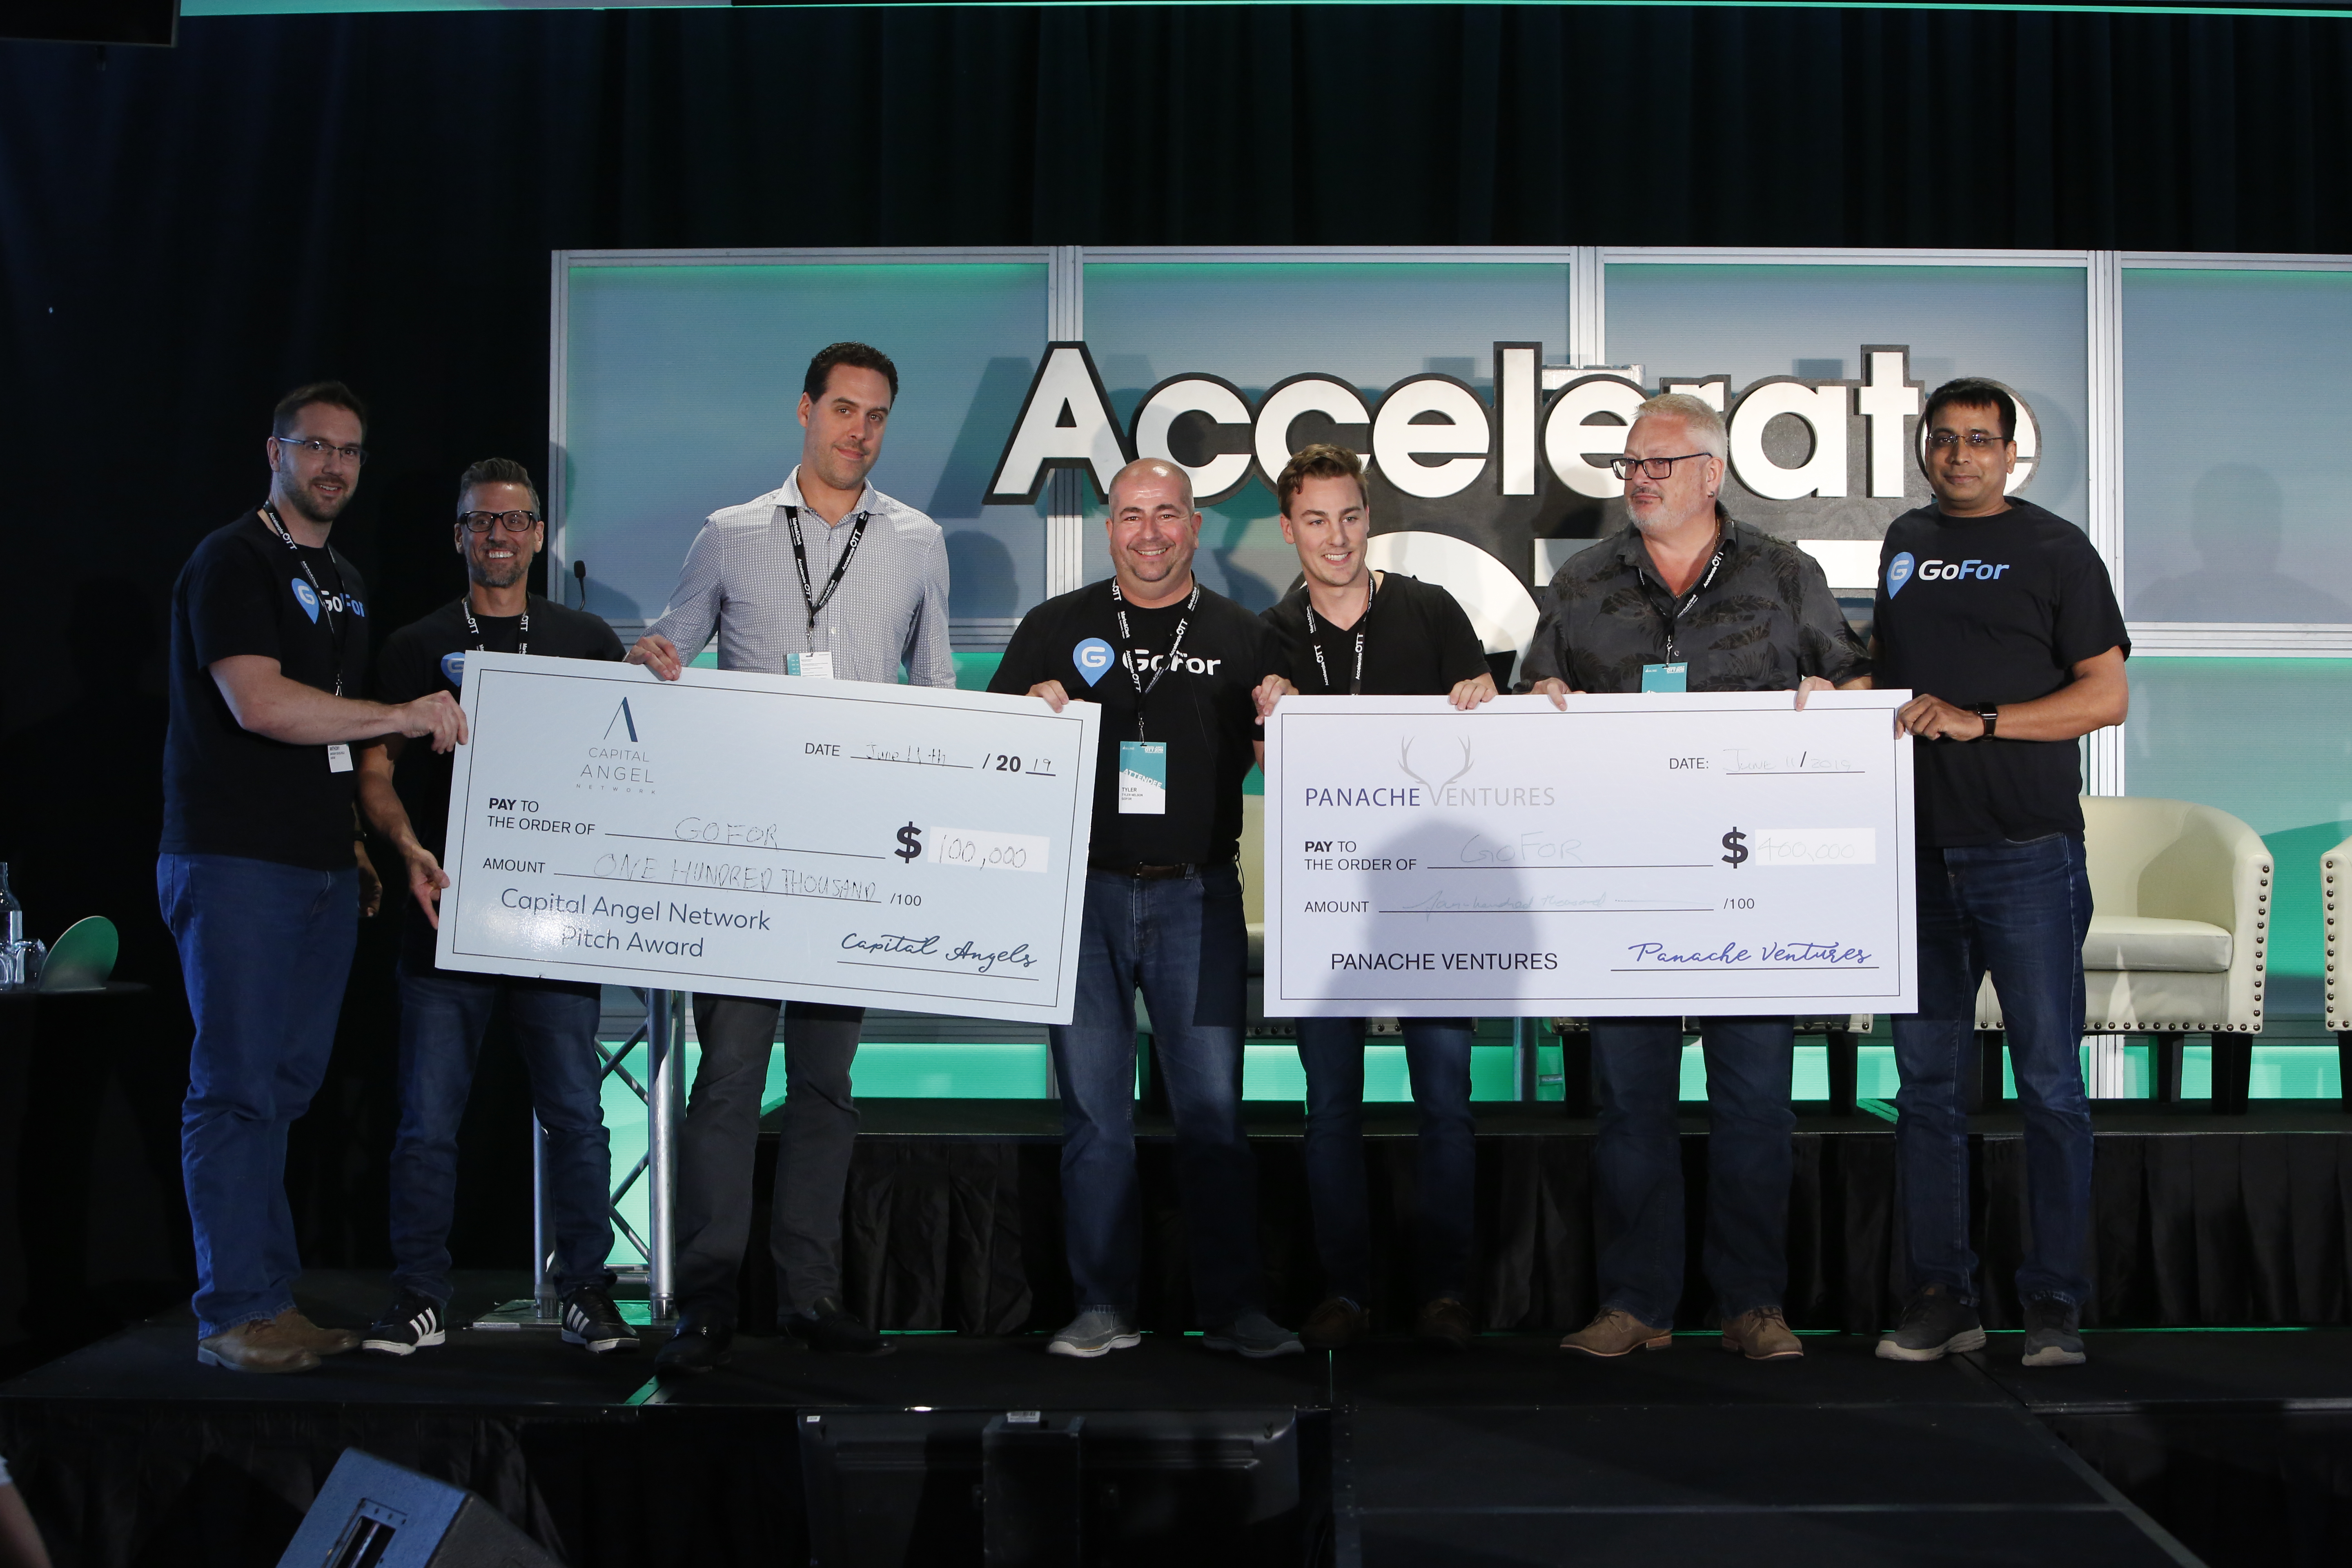 Winners of PitchFest holding giant cheques. GoFor wins PitchFest at AccelerateOTT 2019, held at the National Arts Centre in Ottawa, Ontario, Canada on June 11, 2019. Photo by David Kawai for Invest Ottawa.